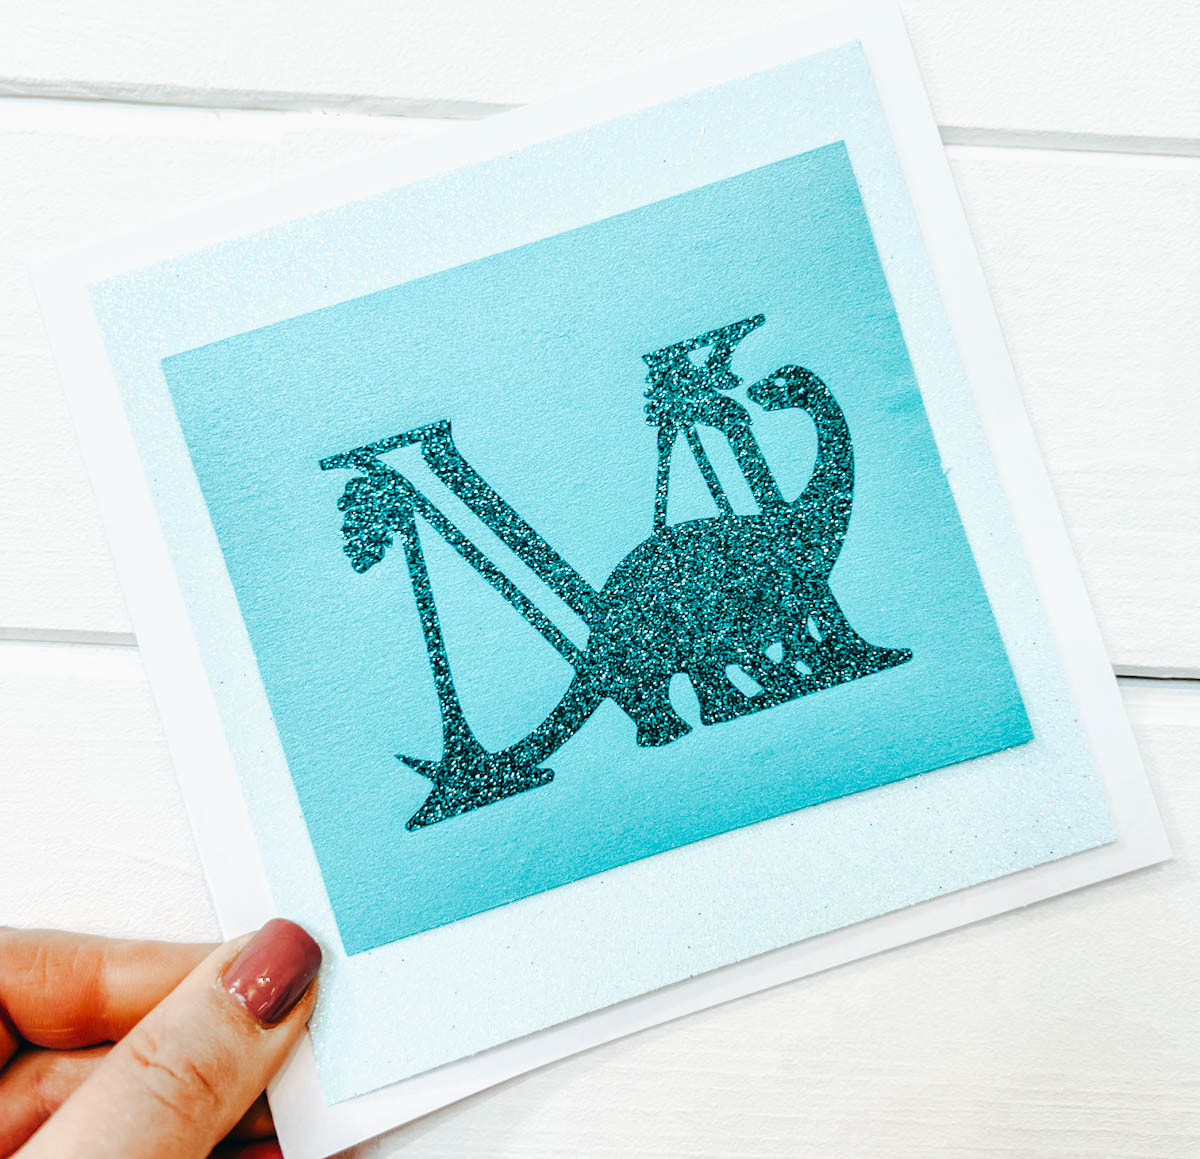 Make Cards With Heat Transfer Vinyl